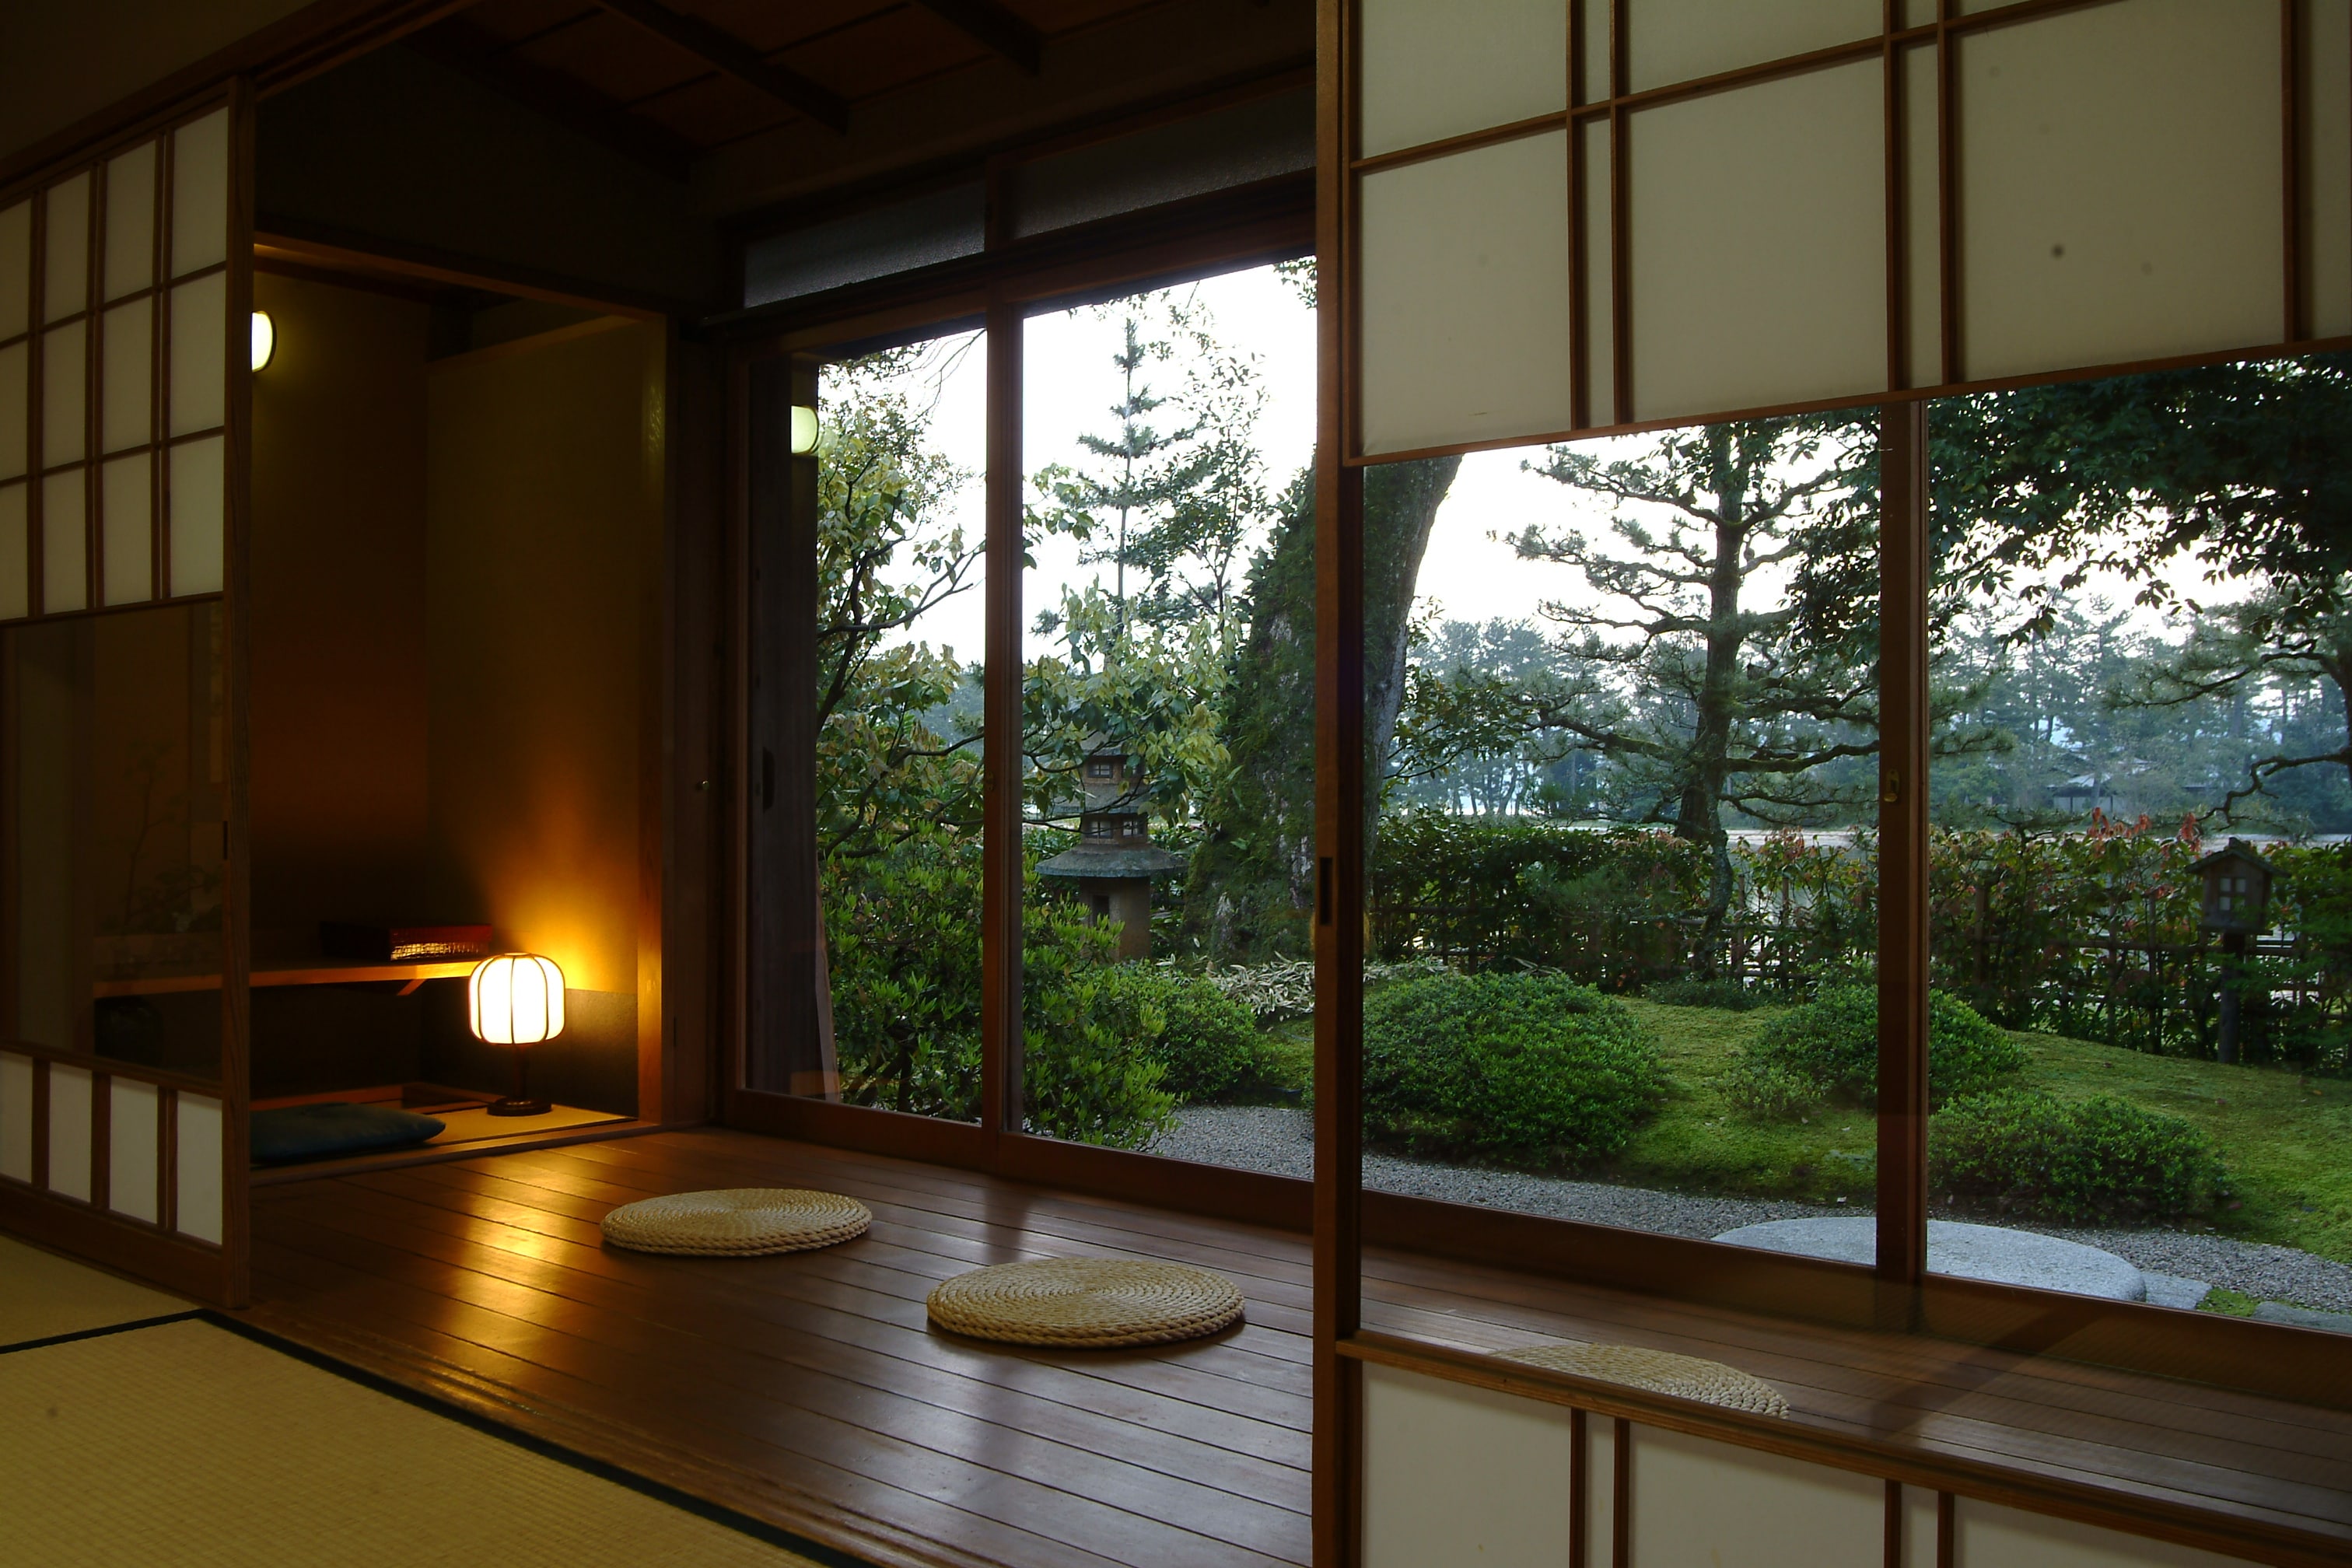 [Ryuto no Ma / Matsukoto no Ma] Enjoy the three most scenic spots in Japan while relaxing freely.